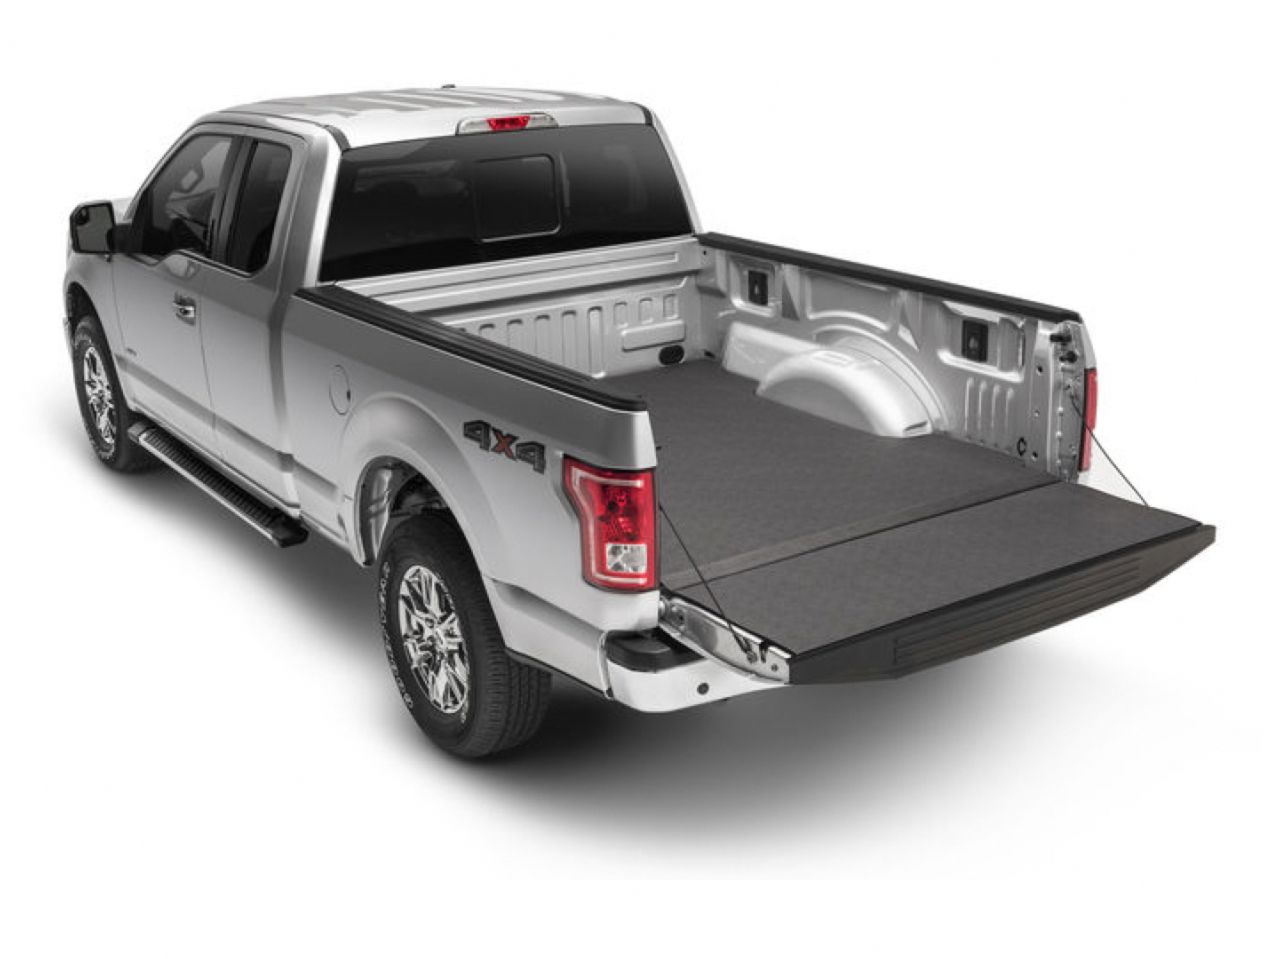 Bedrug Impact Mat For Spray-In Or No Bed Liner 02-18 (19 Classic) Dodge Ram 8